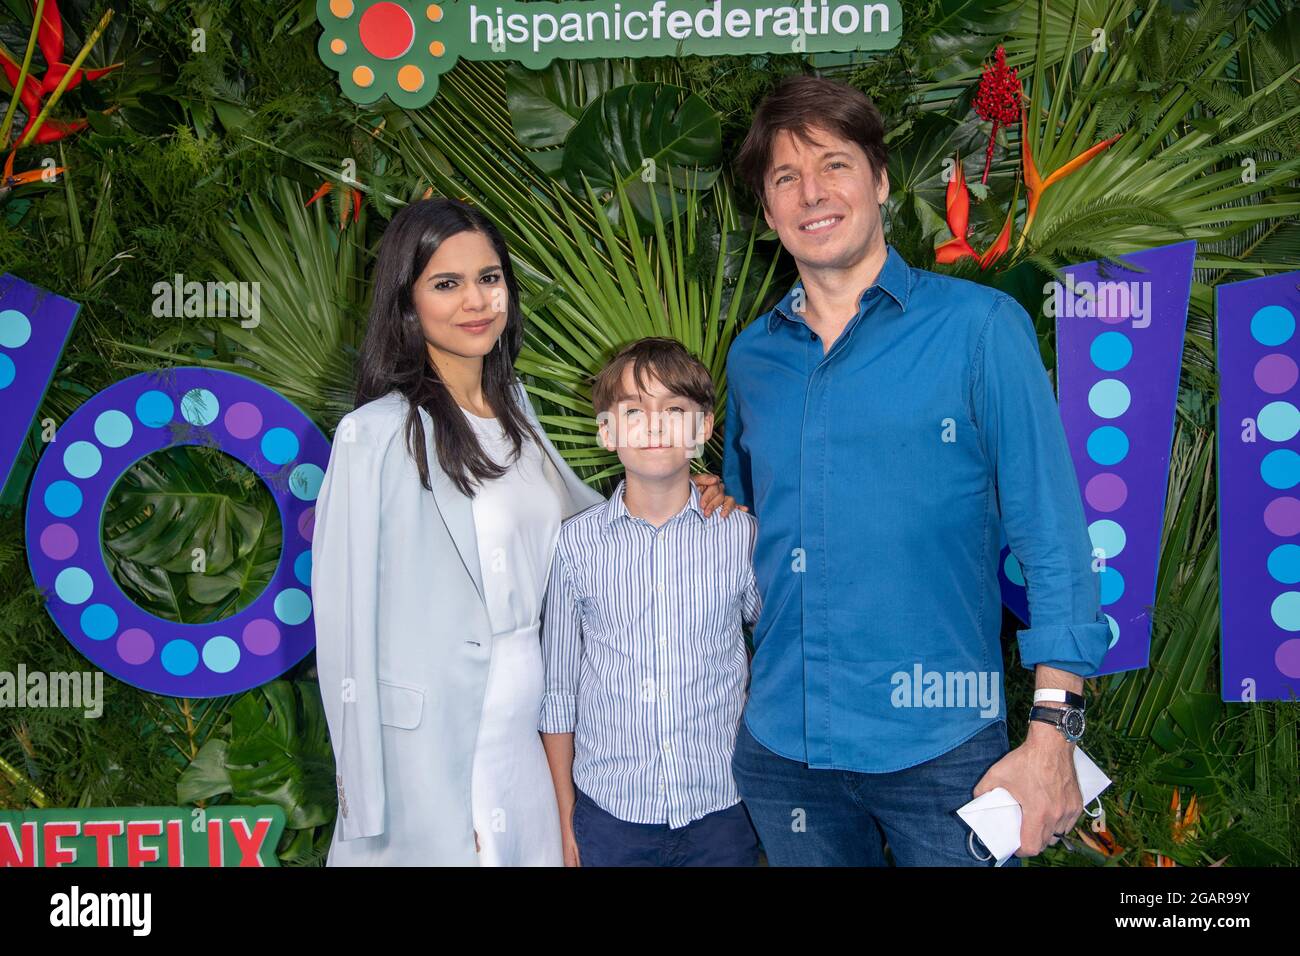 NEW YORK, NY - JULY 31: Musician Joshua Bell (R) and family attend the 'VIVO' New York screening at Village East by Angelika on July 31, 2021 in New York City. Stock Photo